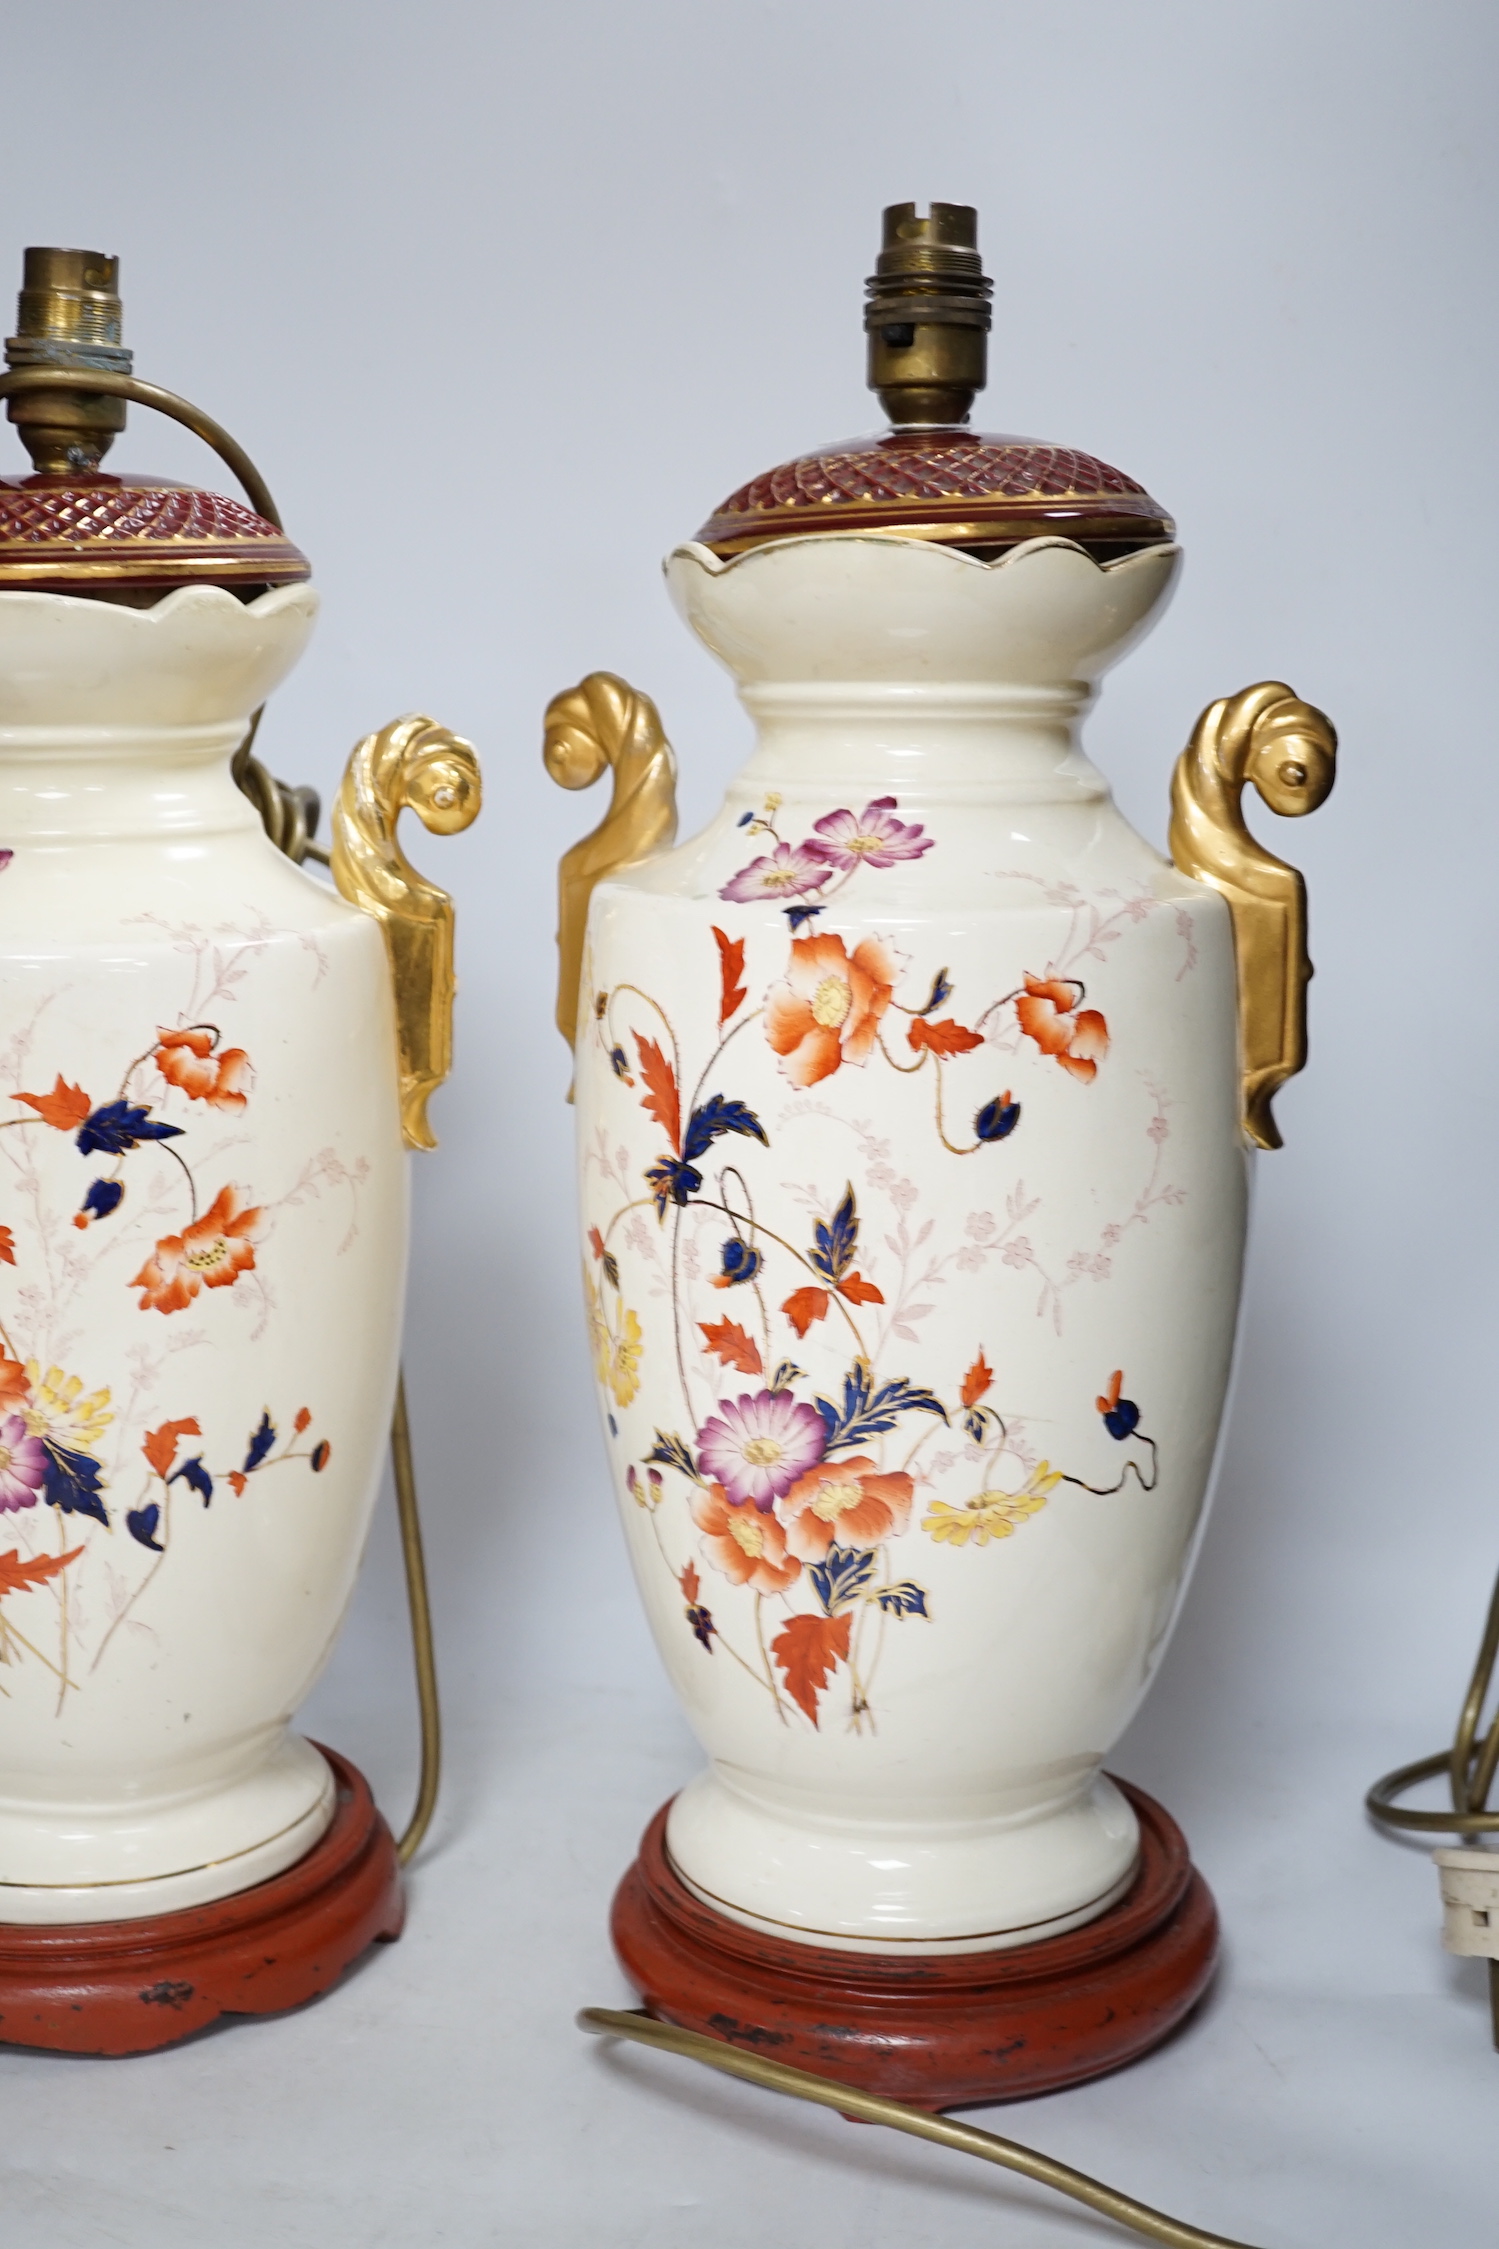 A pair of early 20th century vases mounted as table lamps, hand painted with flowers, 45cm high